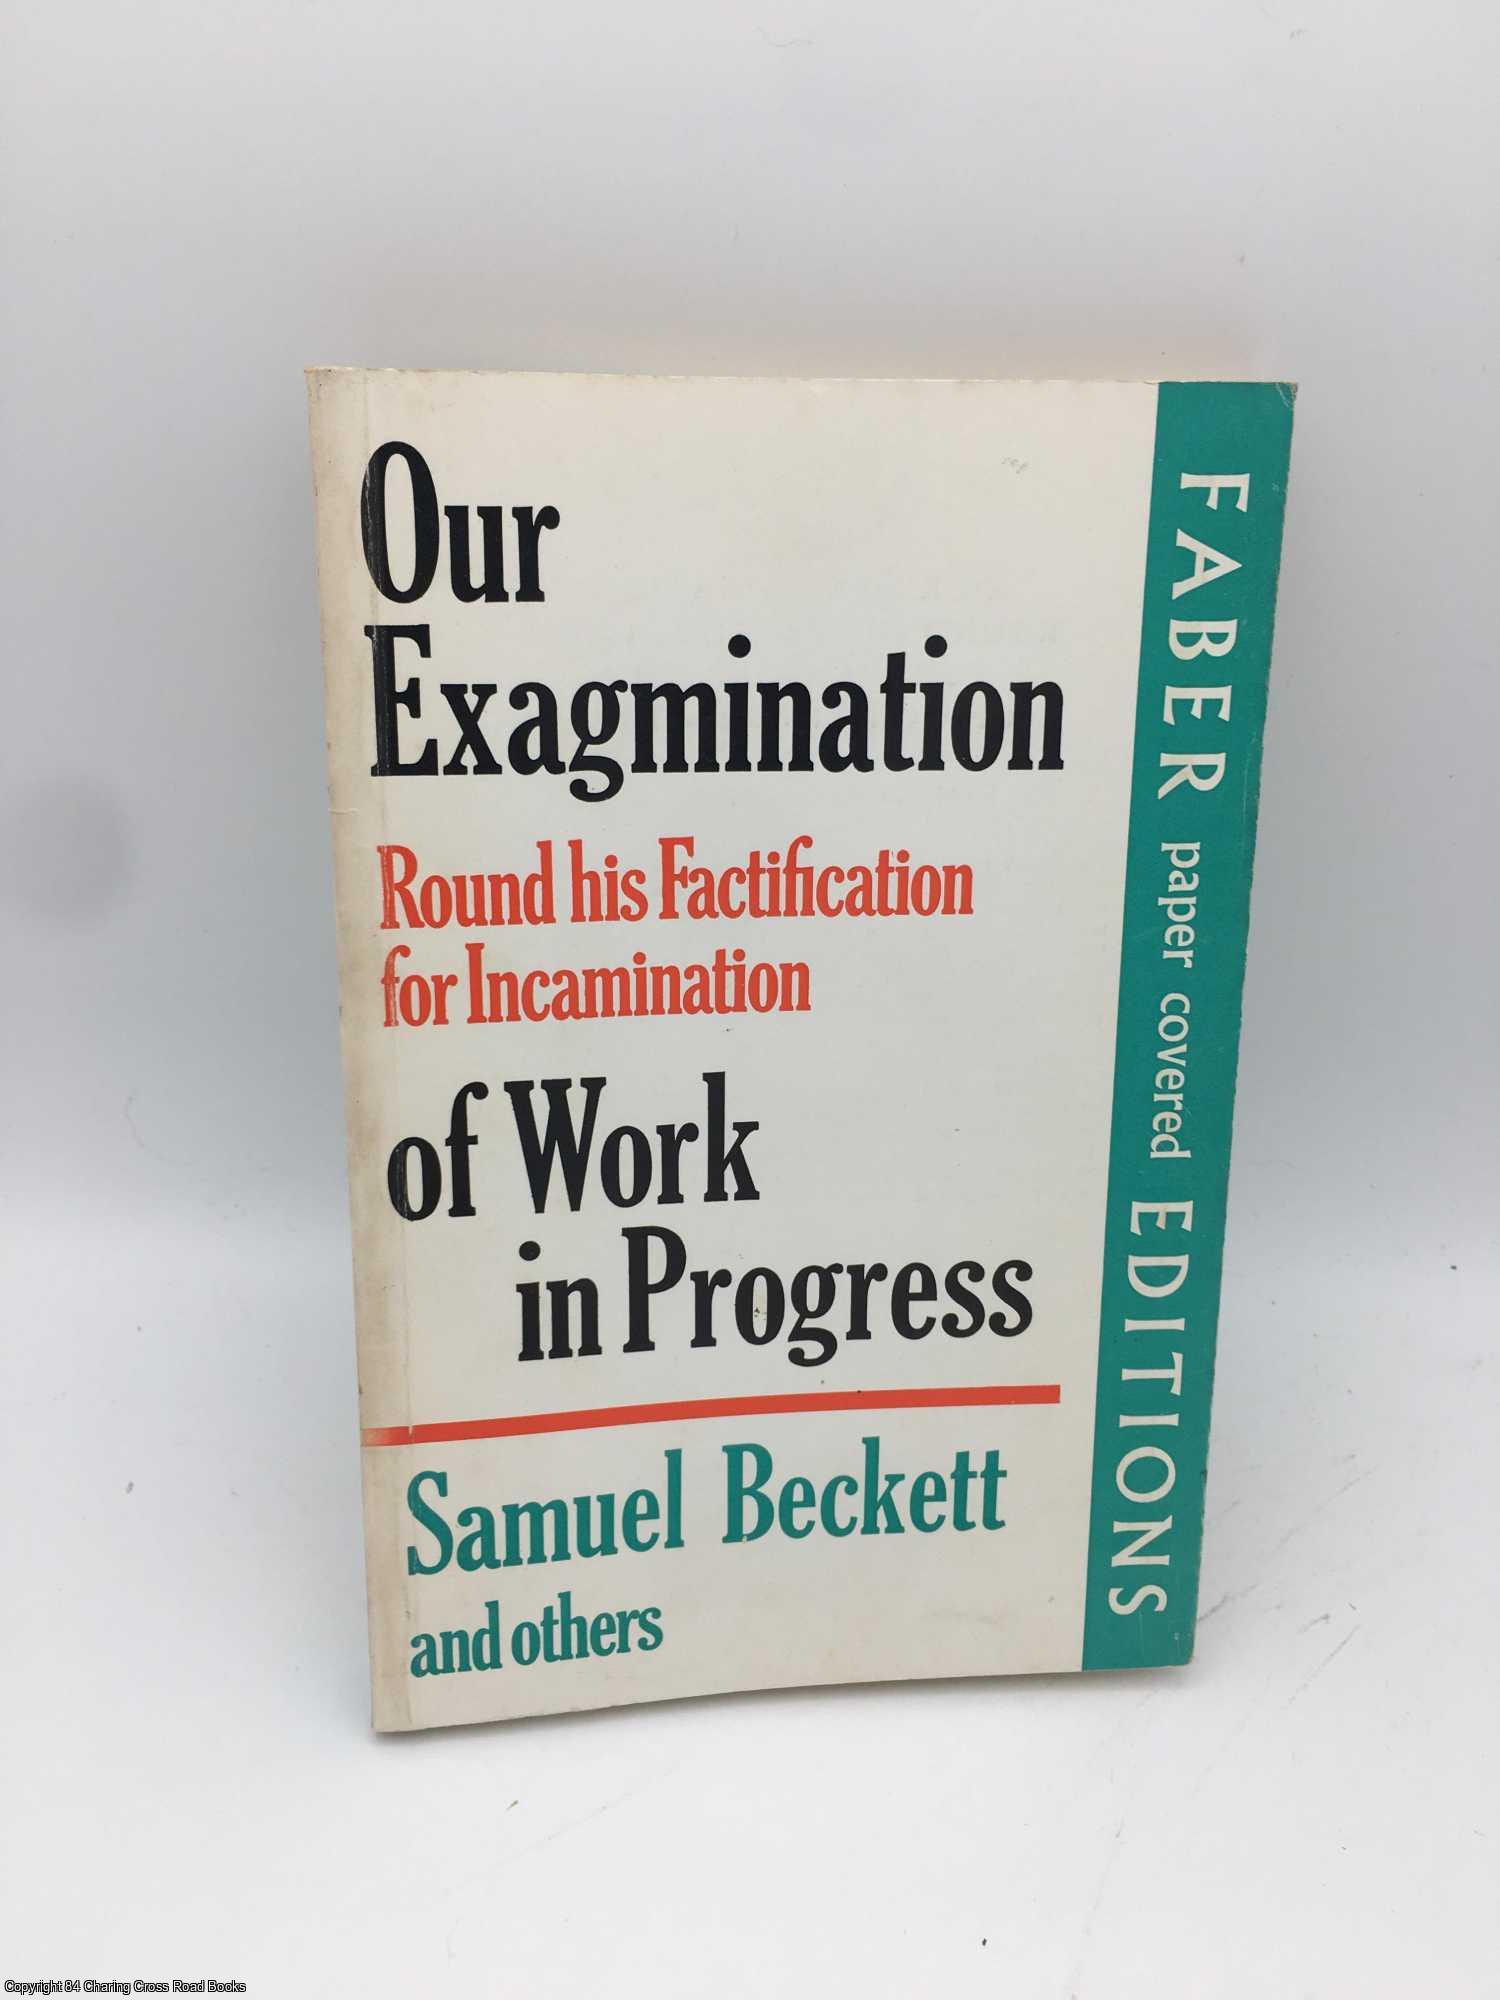 Beckett, Samuel - Our Exagmination Round His Factification for Incamination of Work in Progress